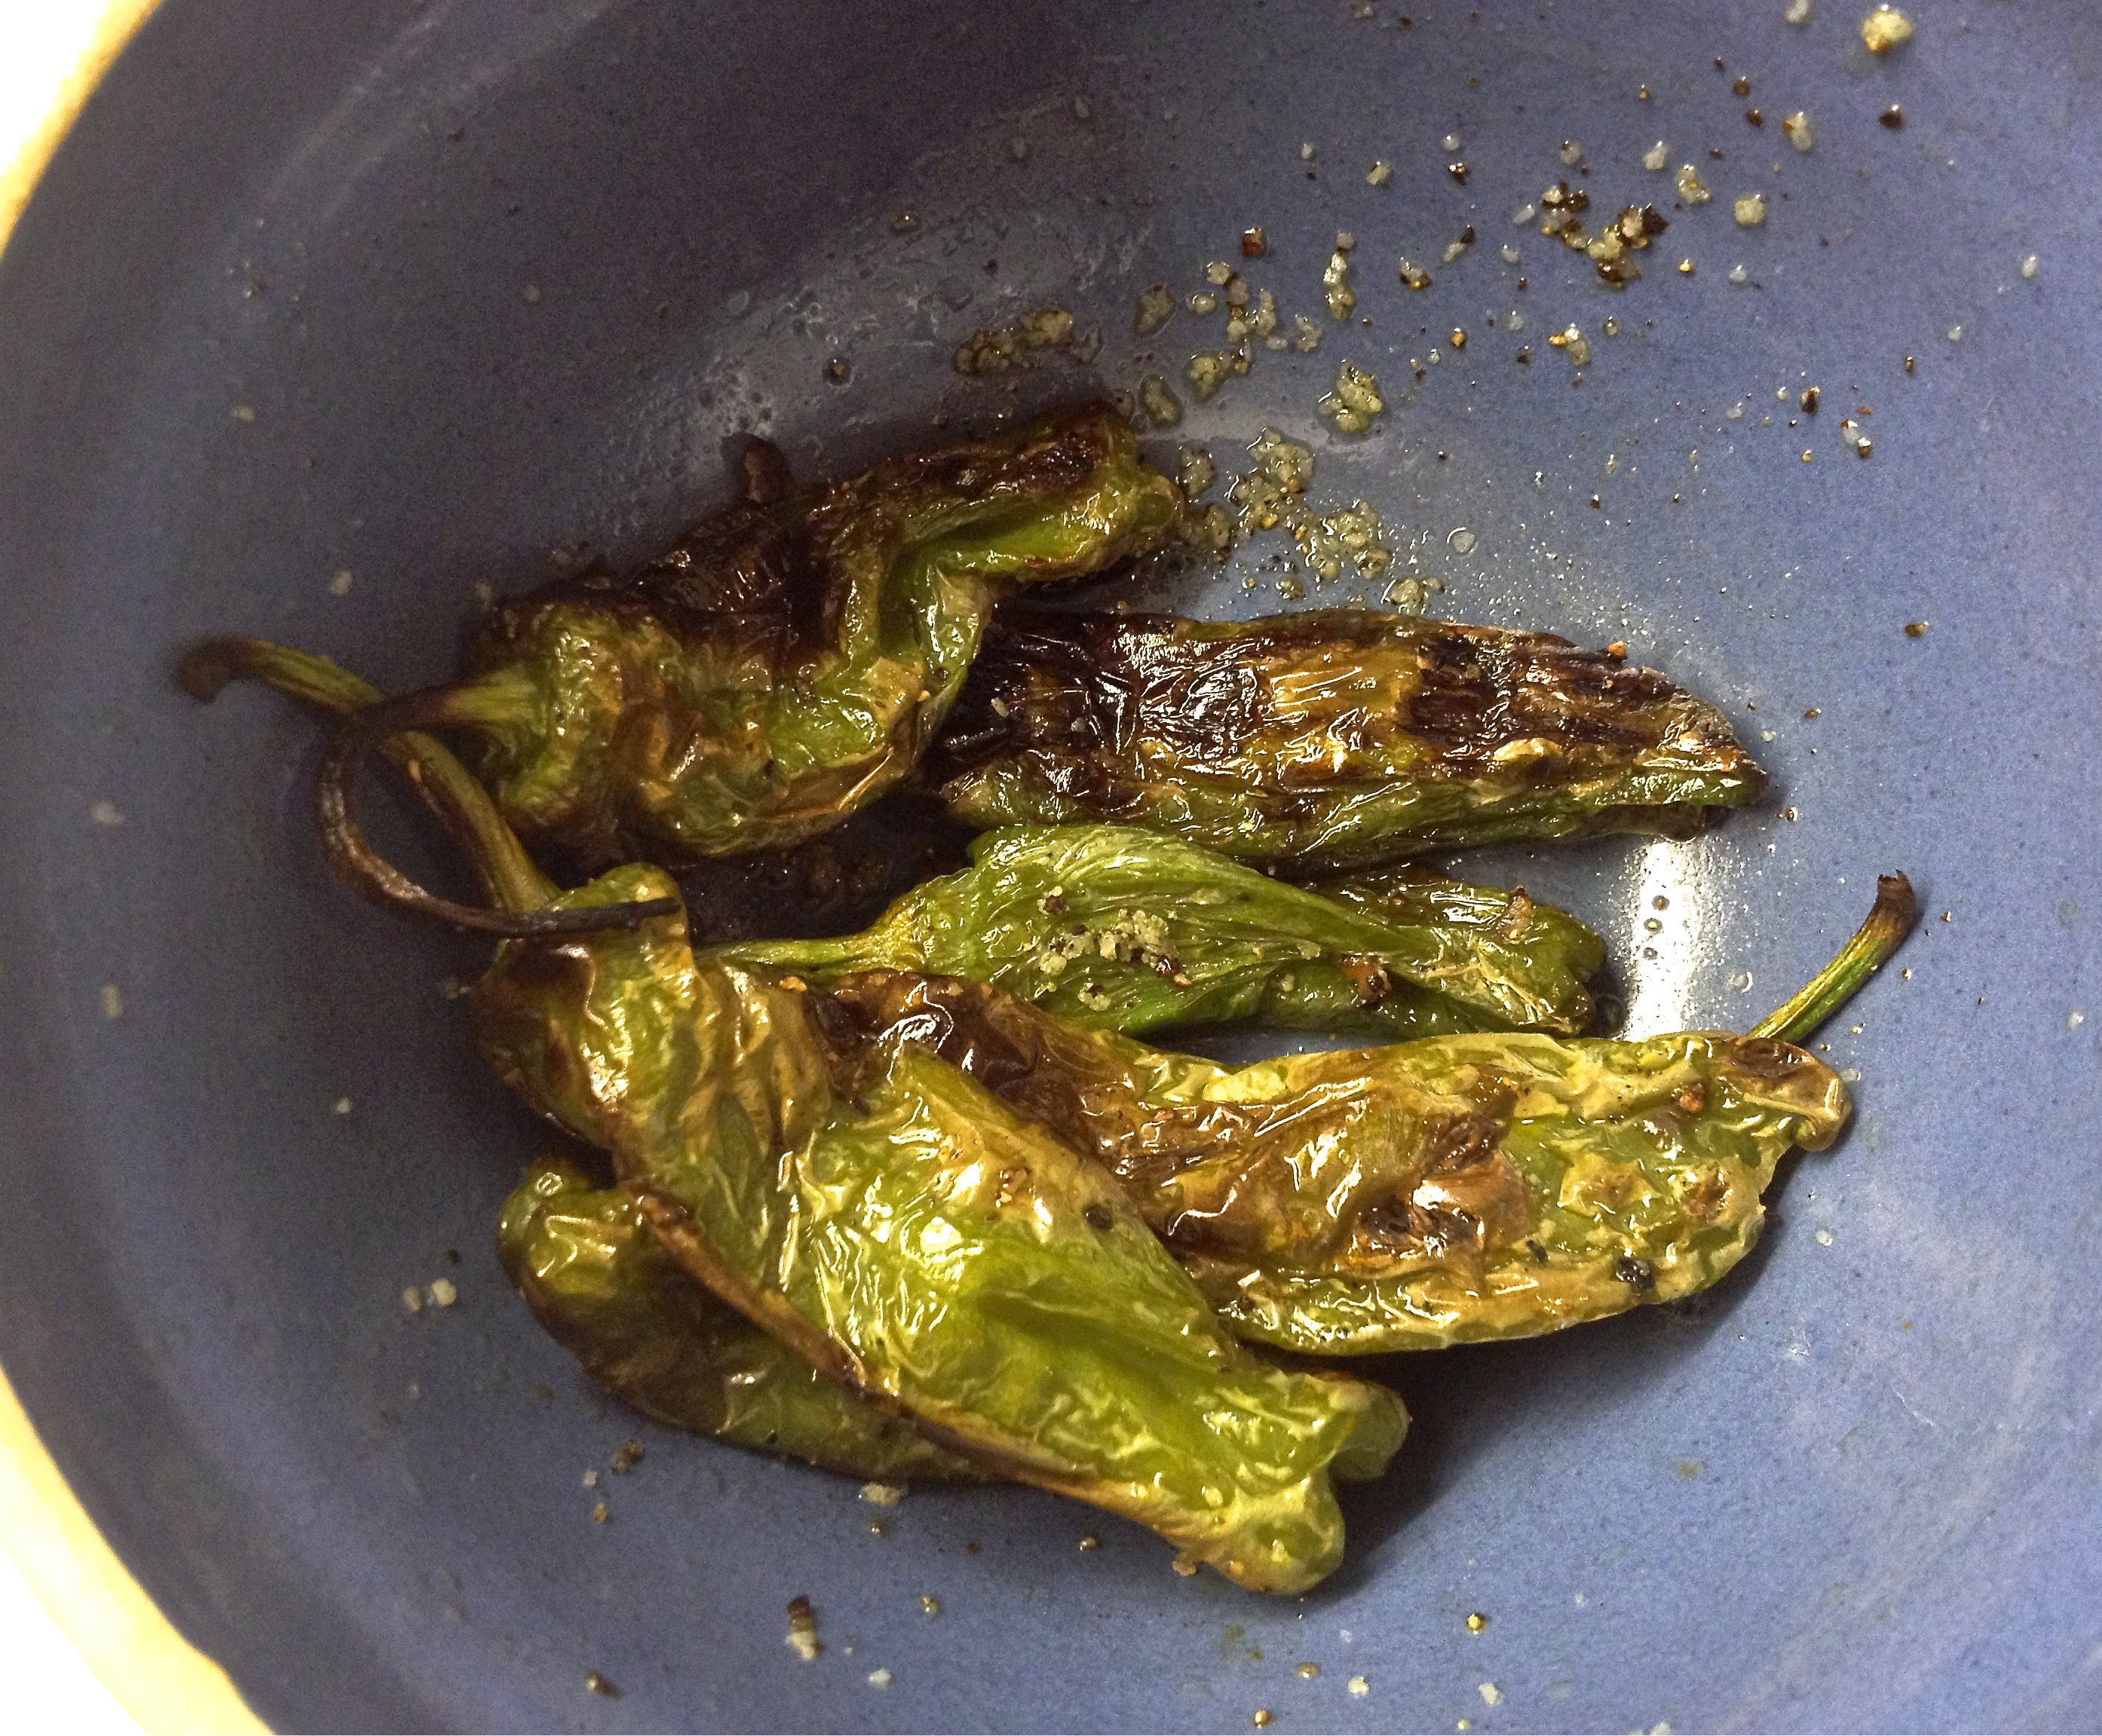 Grilled shisido peppers in an antique blue pottery bowl.